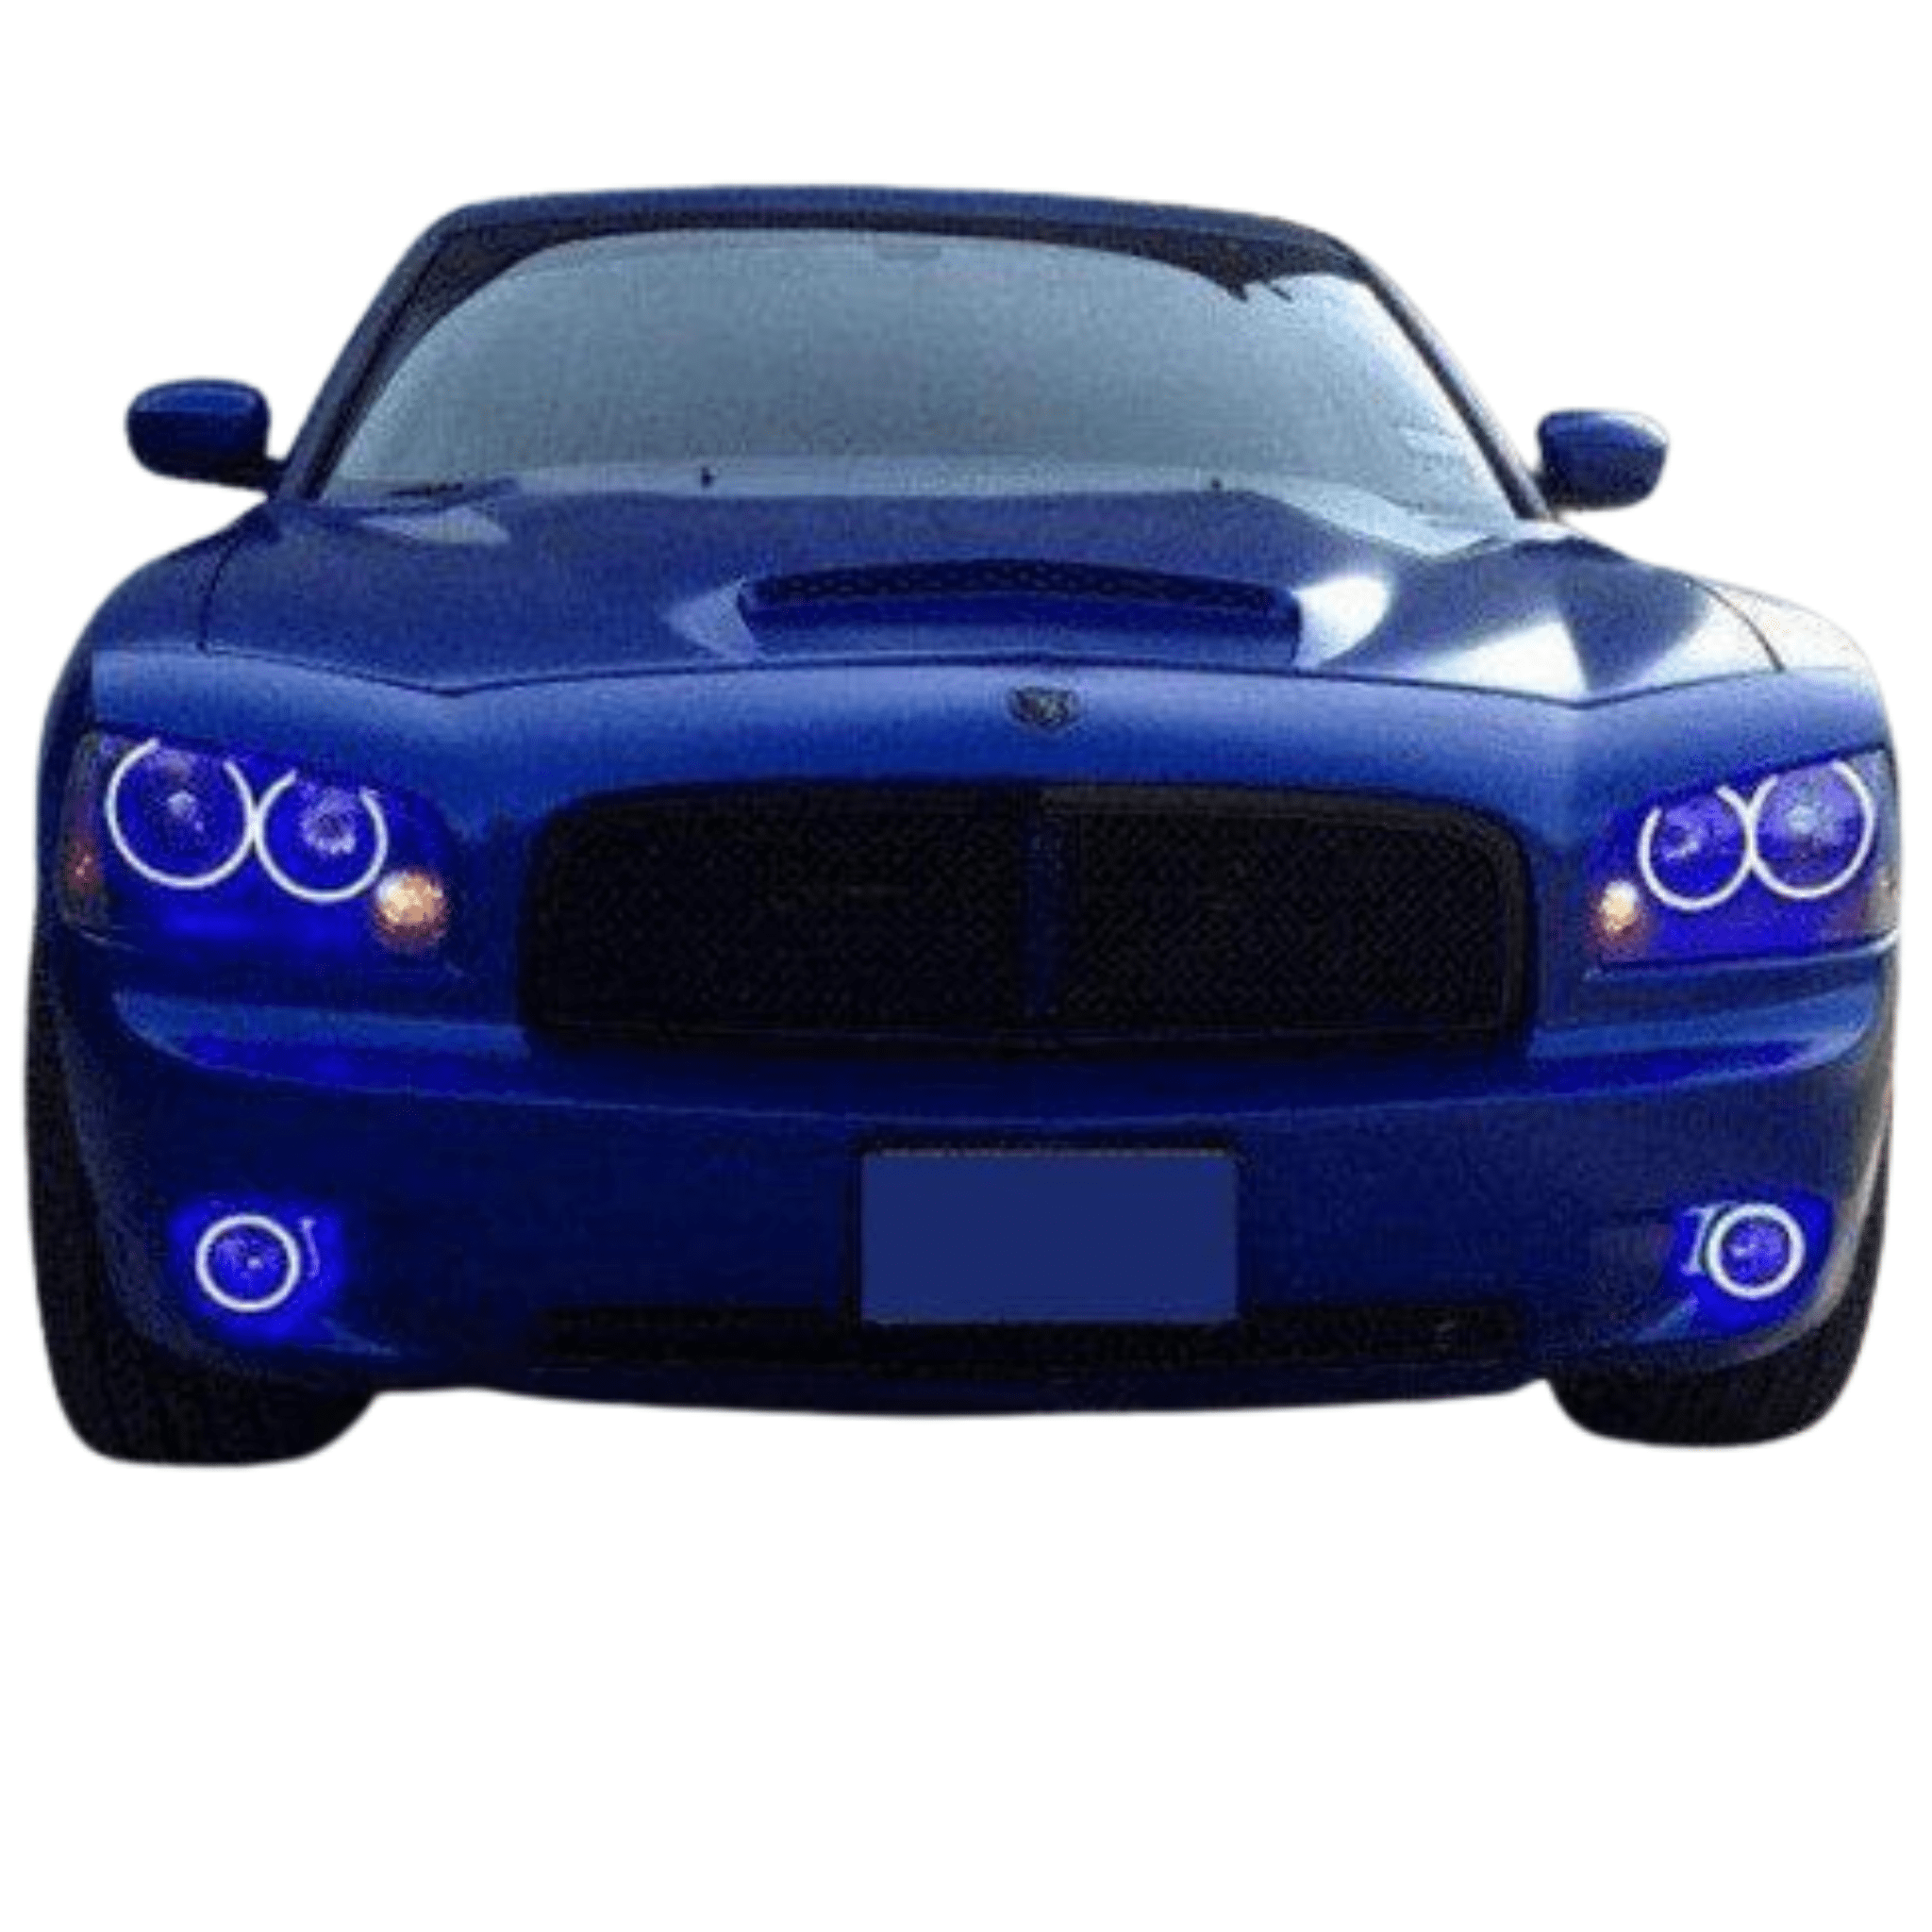 2006-2010 Dodge Charger Multicolor Halo Kit - RGB Halo Kits Multicolor Flow Series Color Chasing RGBWA LED headlight kit Oracle Lighting Trendz OneUpLighting Morimoto theretrofitsource AutoLEDTech Diode Dynamics